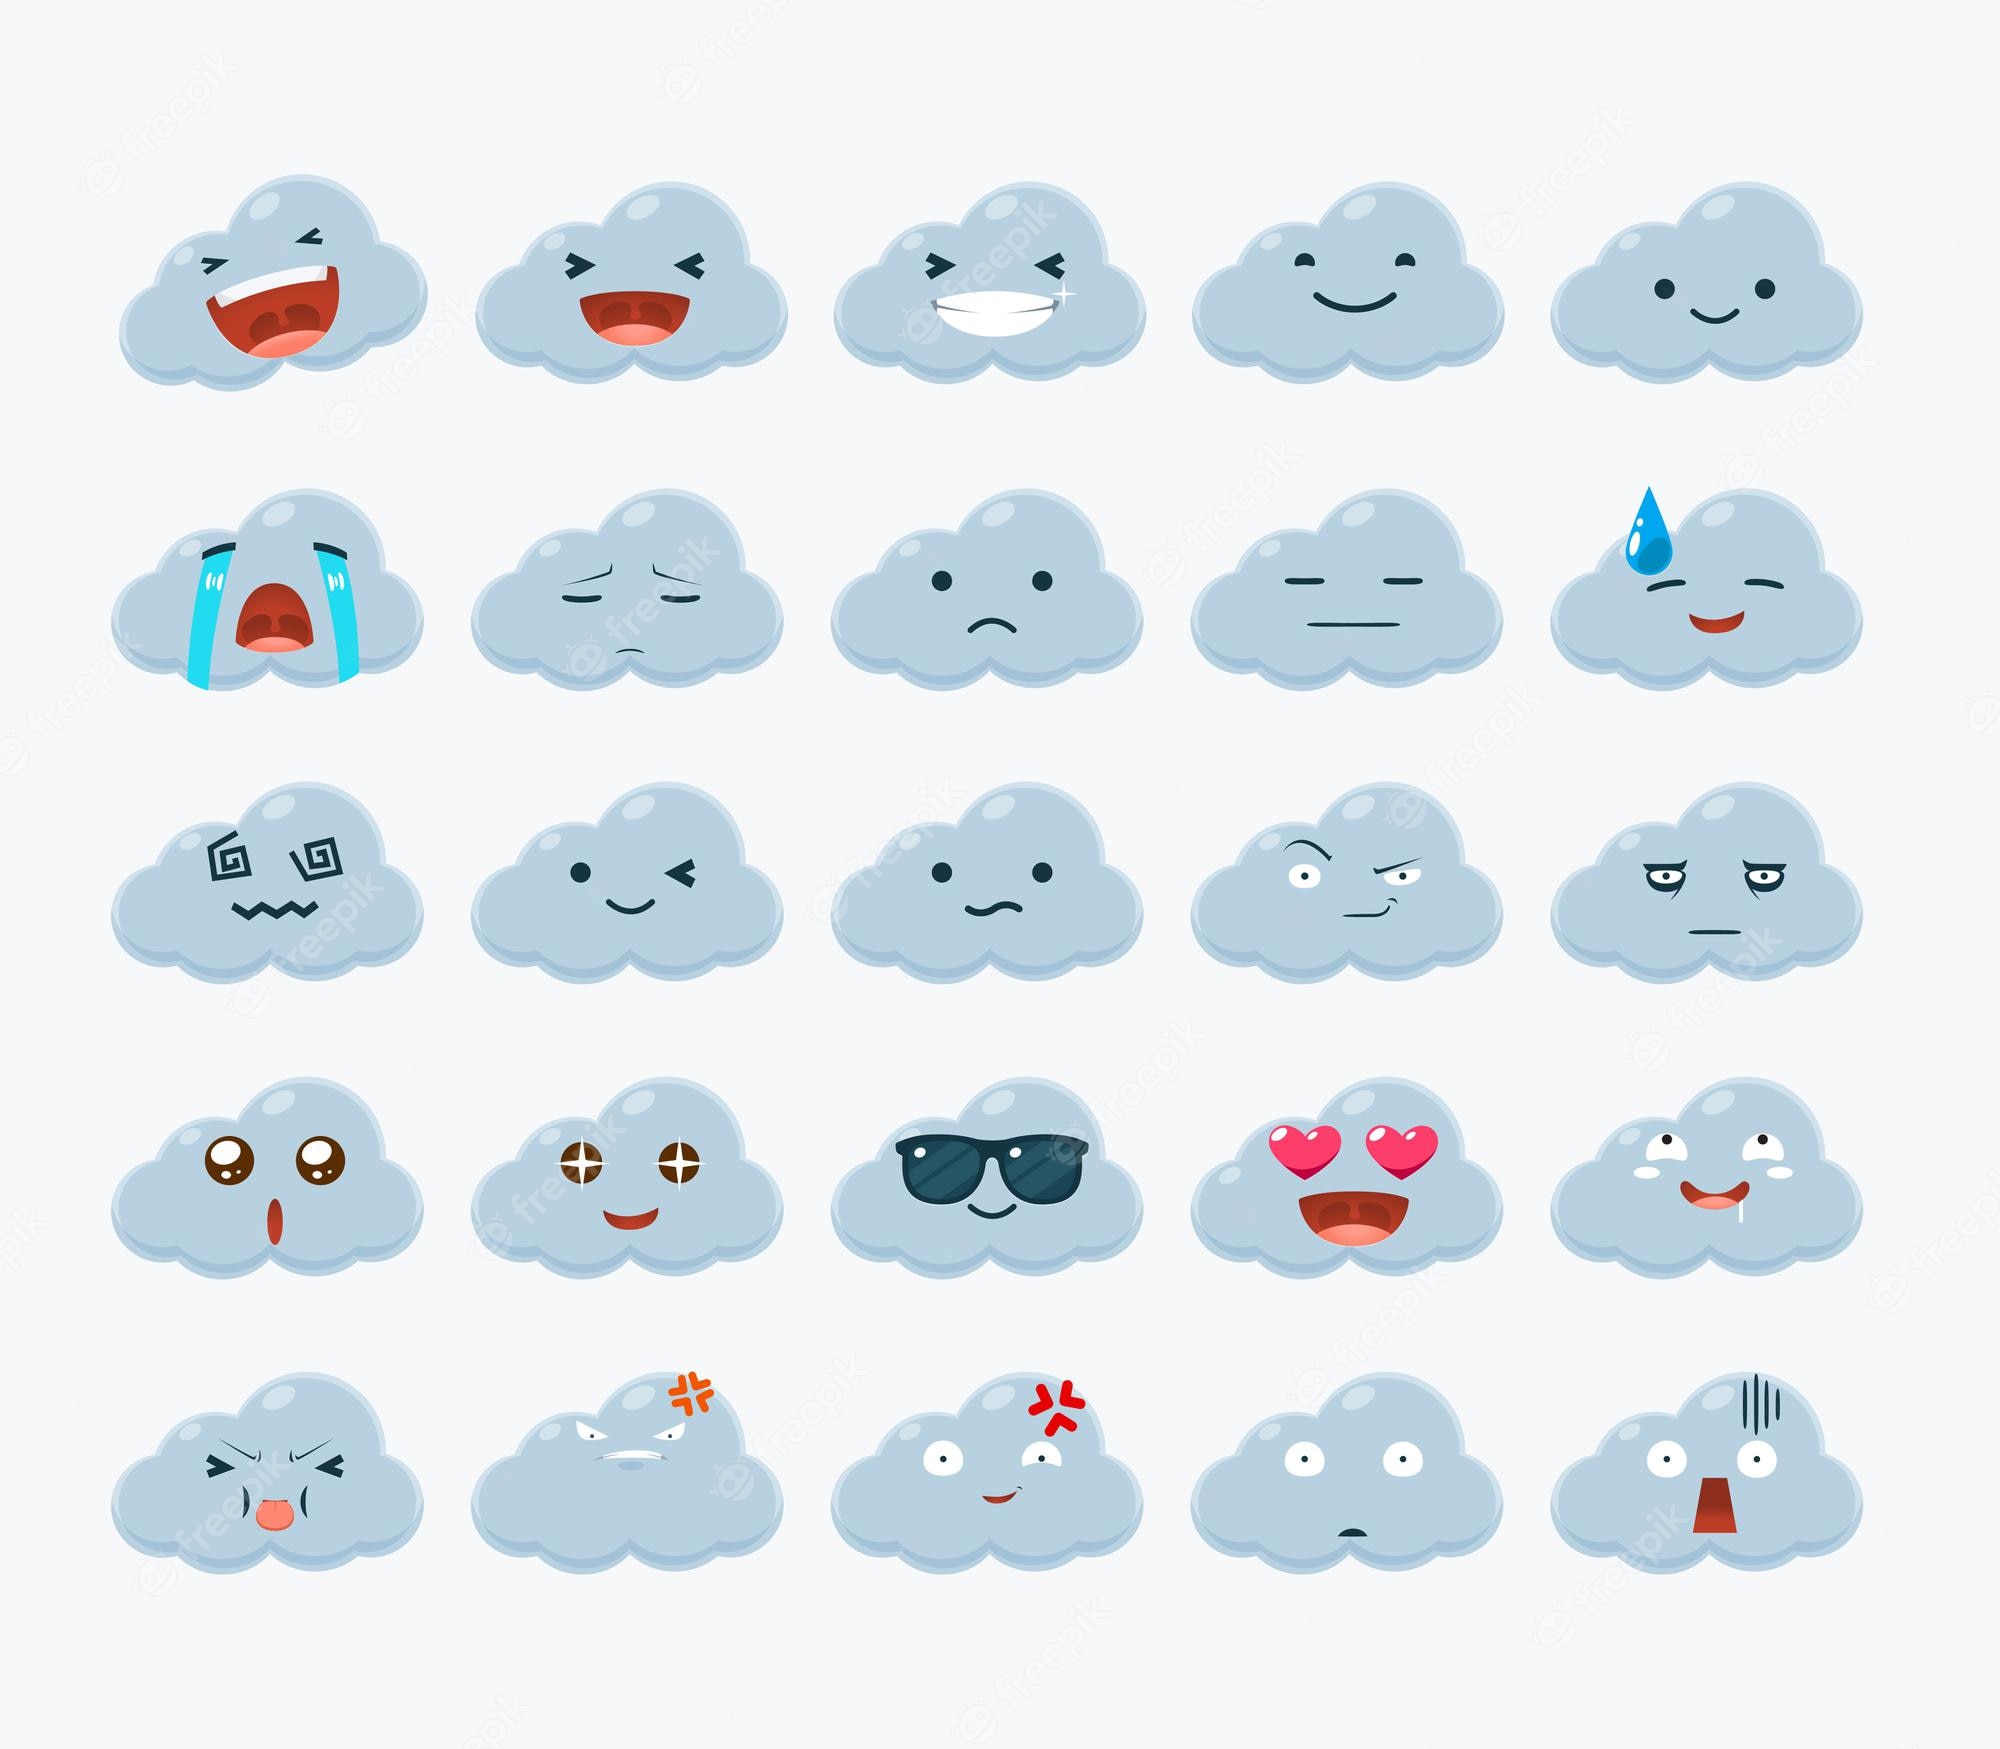 The Meaning Behind the Face in Clouds Emoji 🌥️